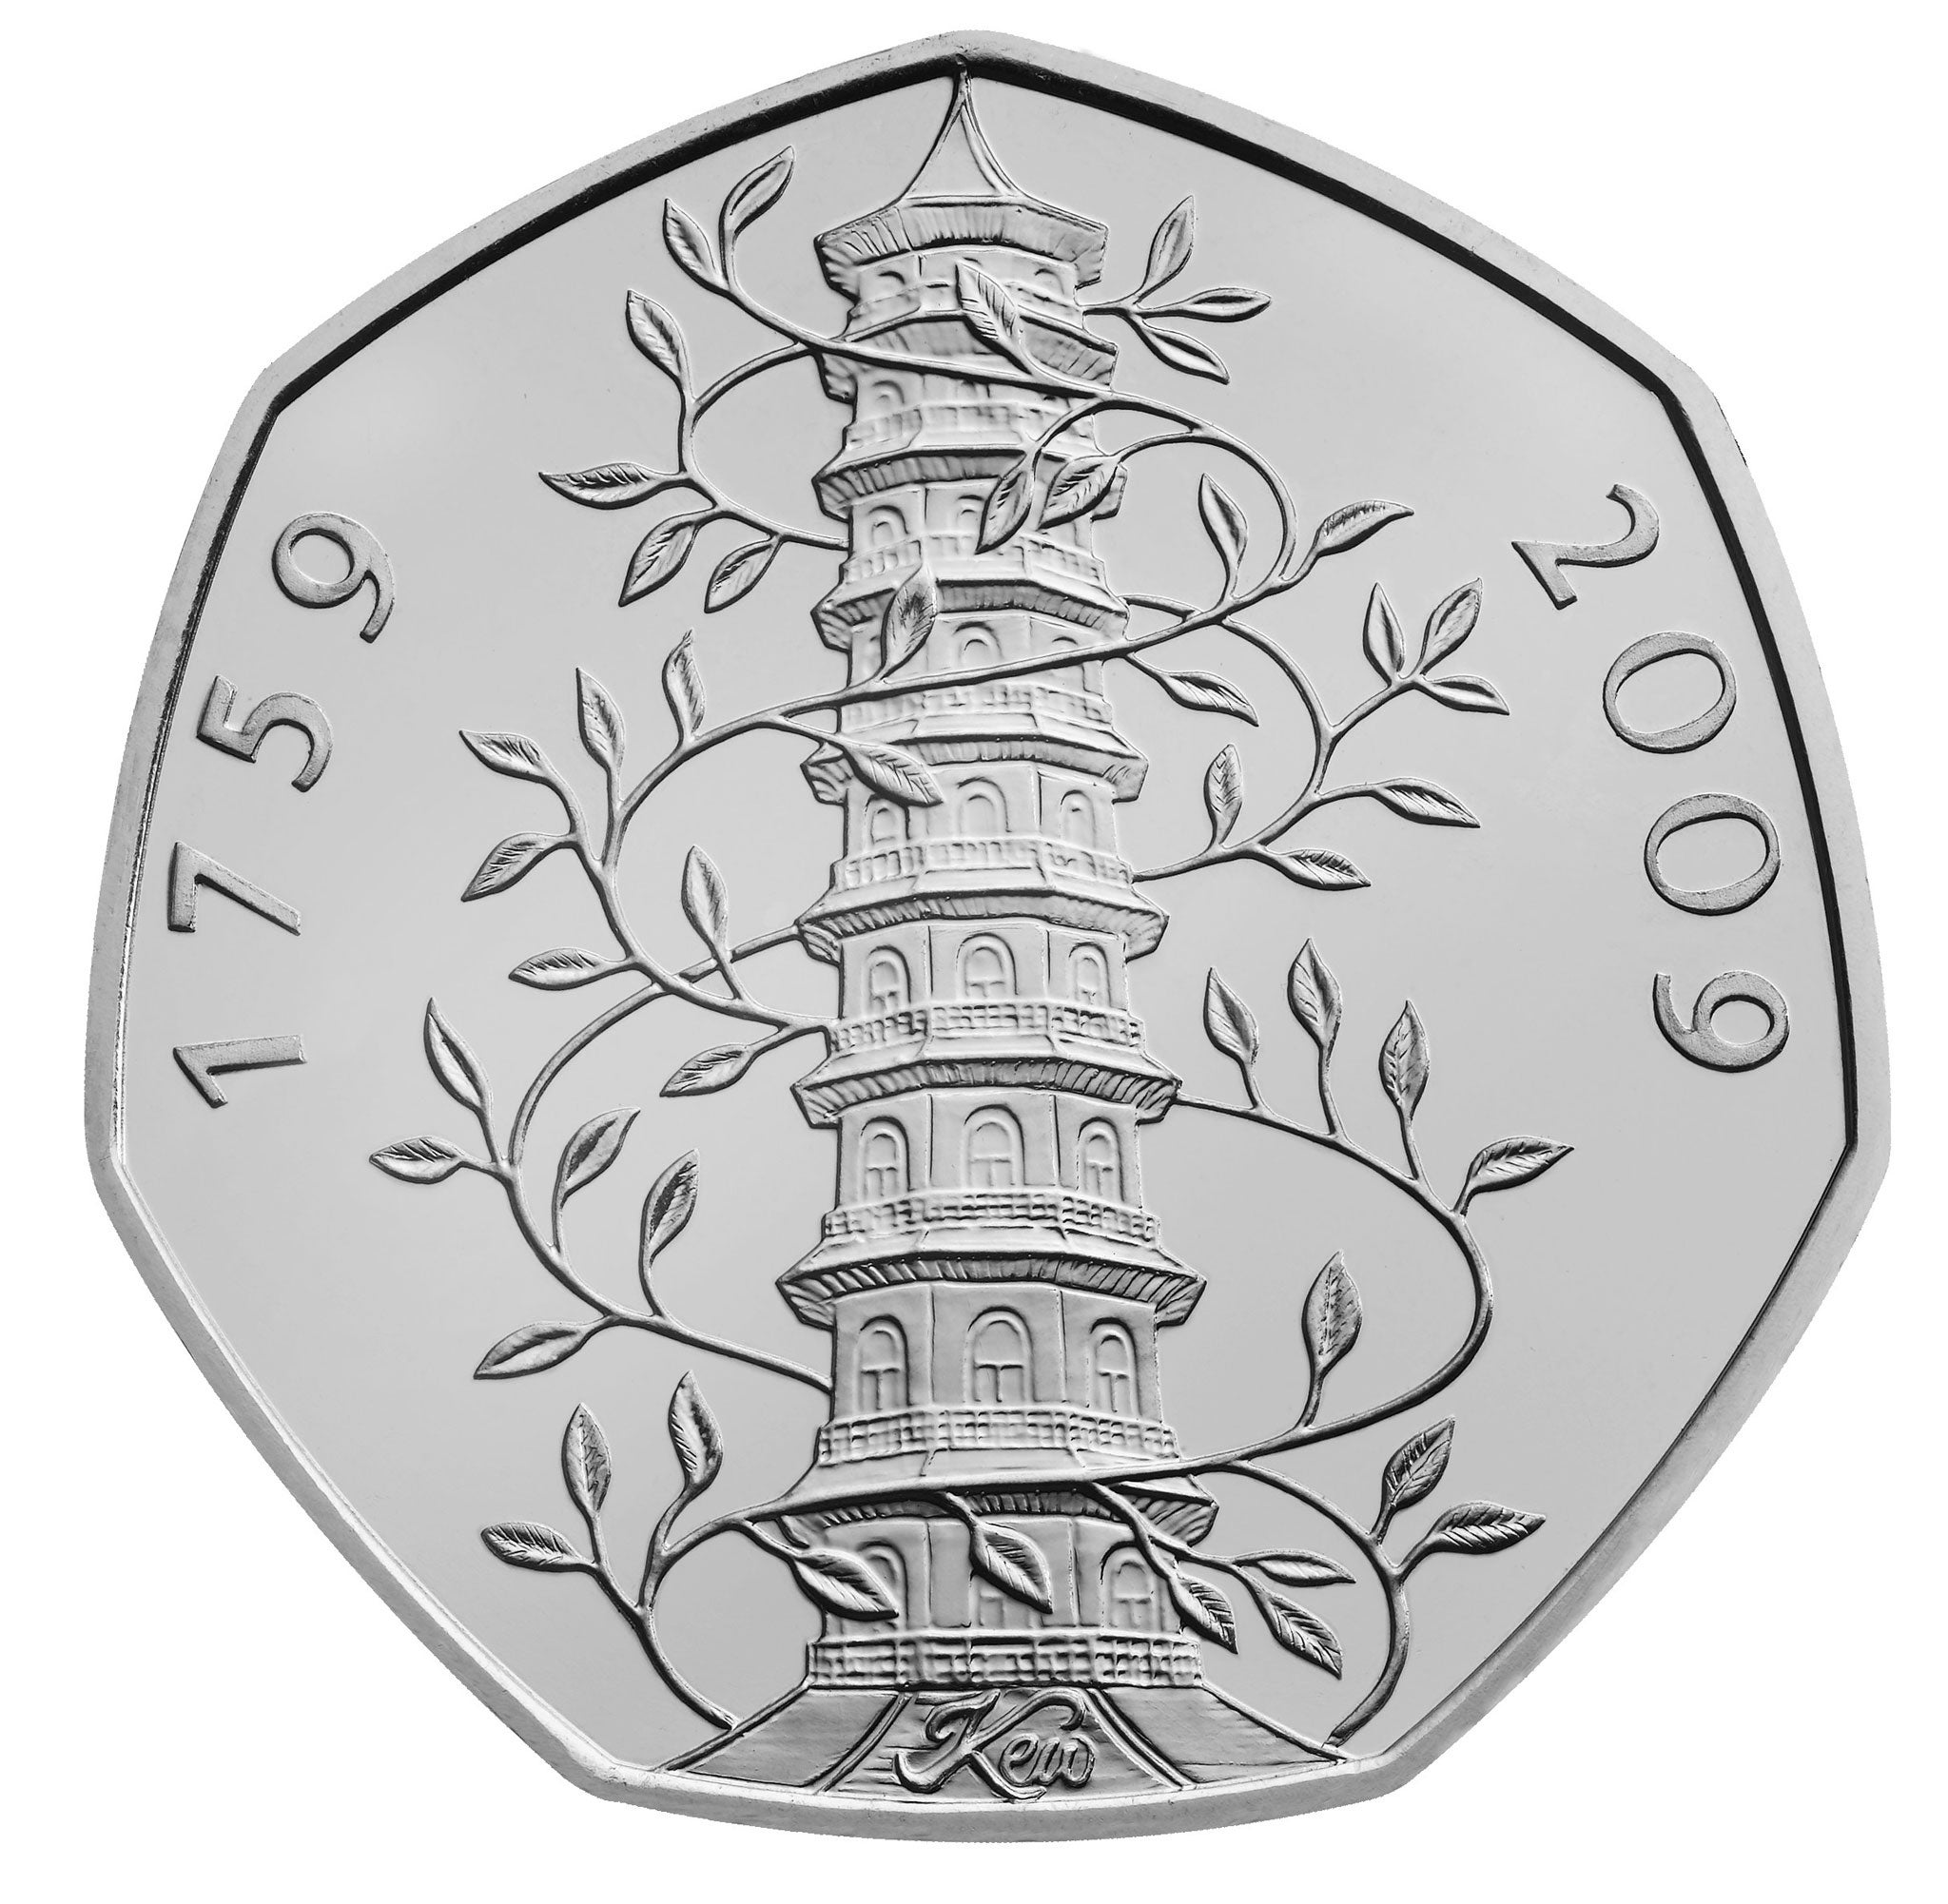 The Kew Gardens 50p released in 2009 is now described as 'incredibly rare'